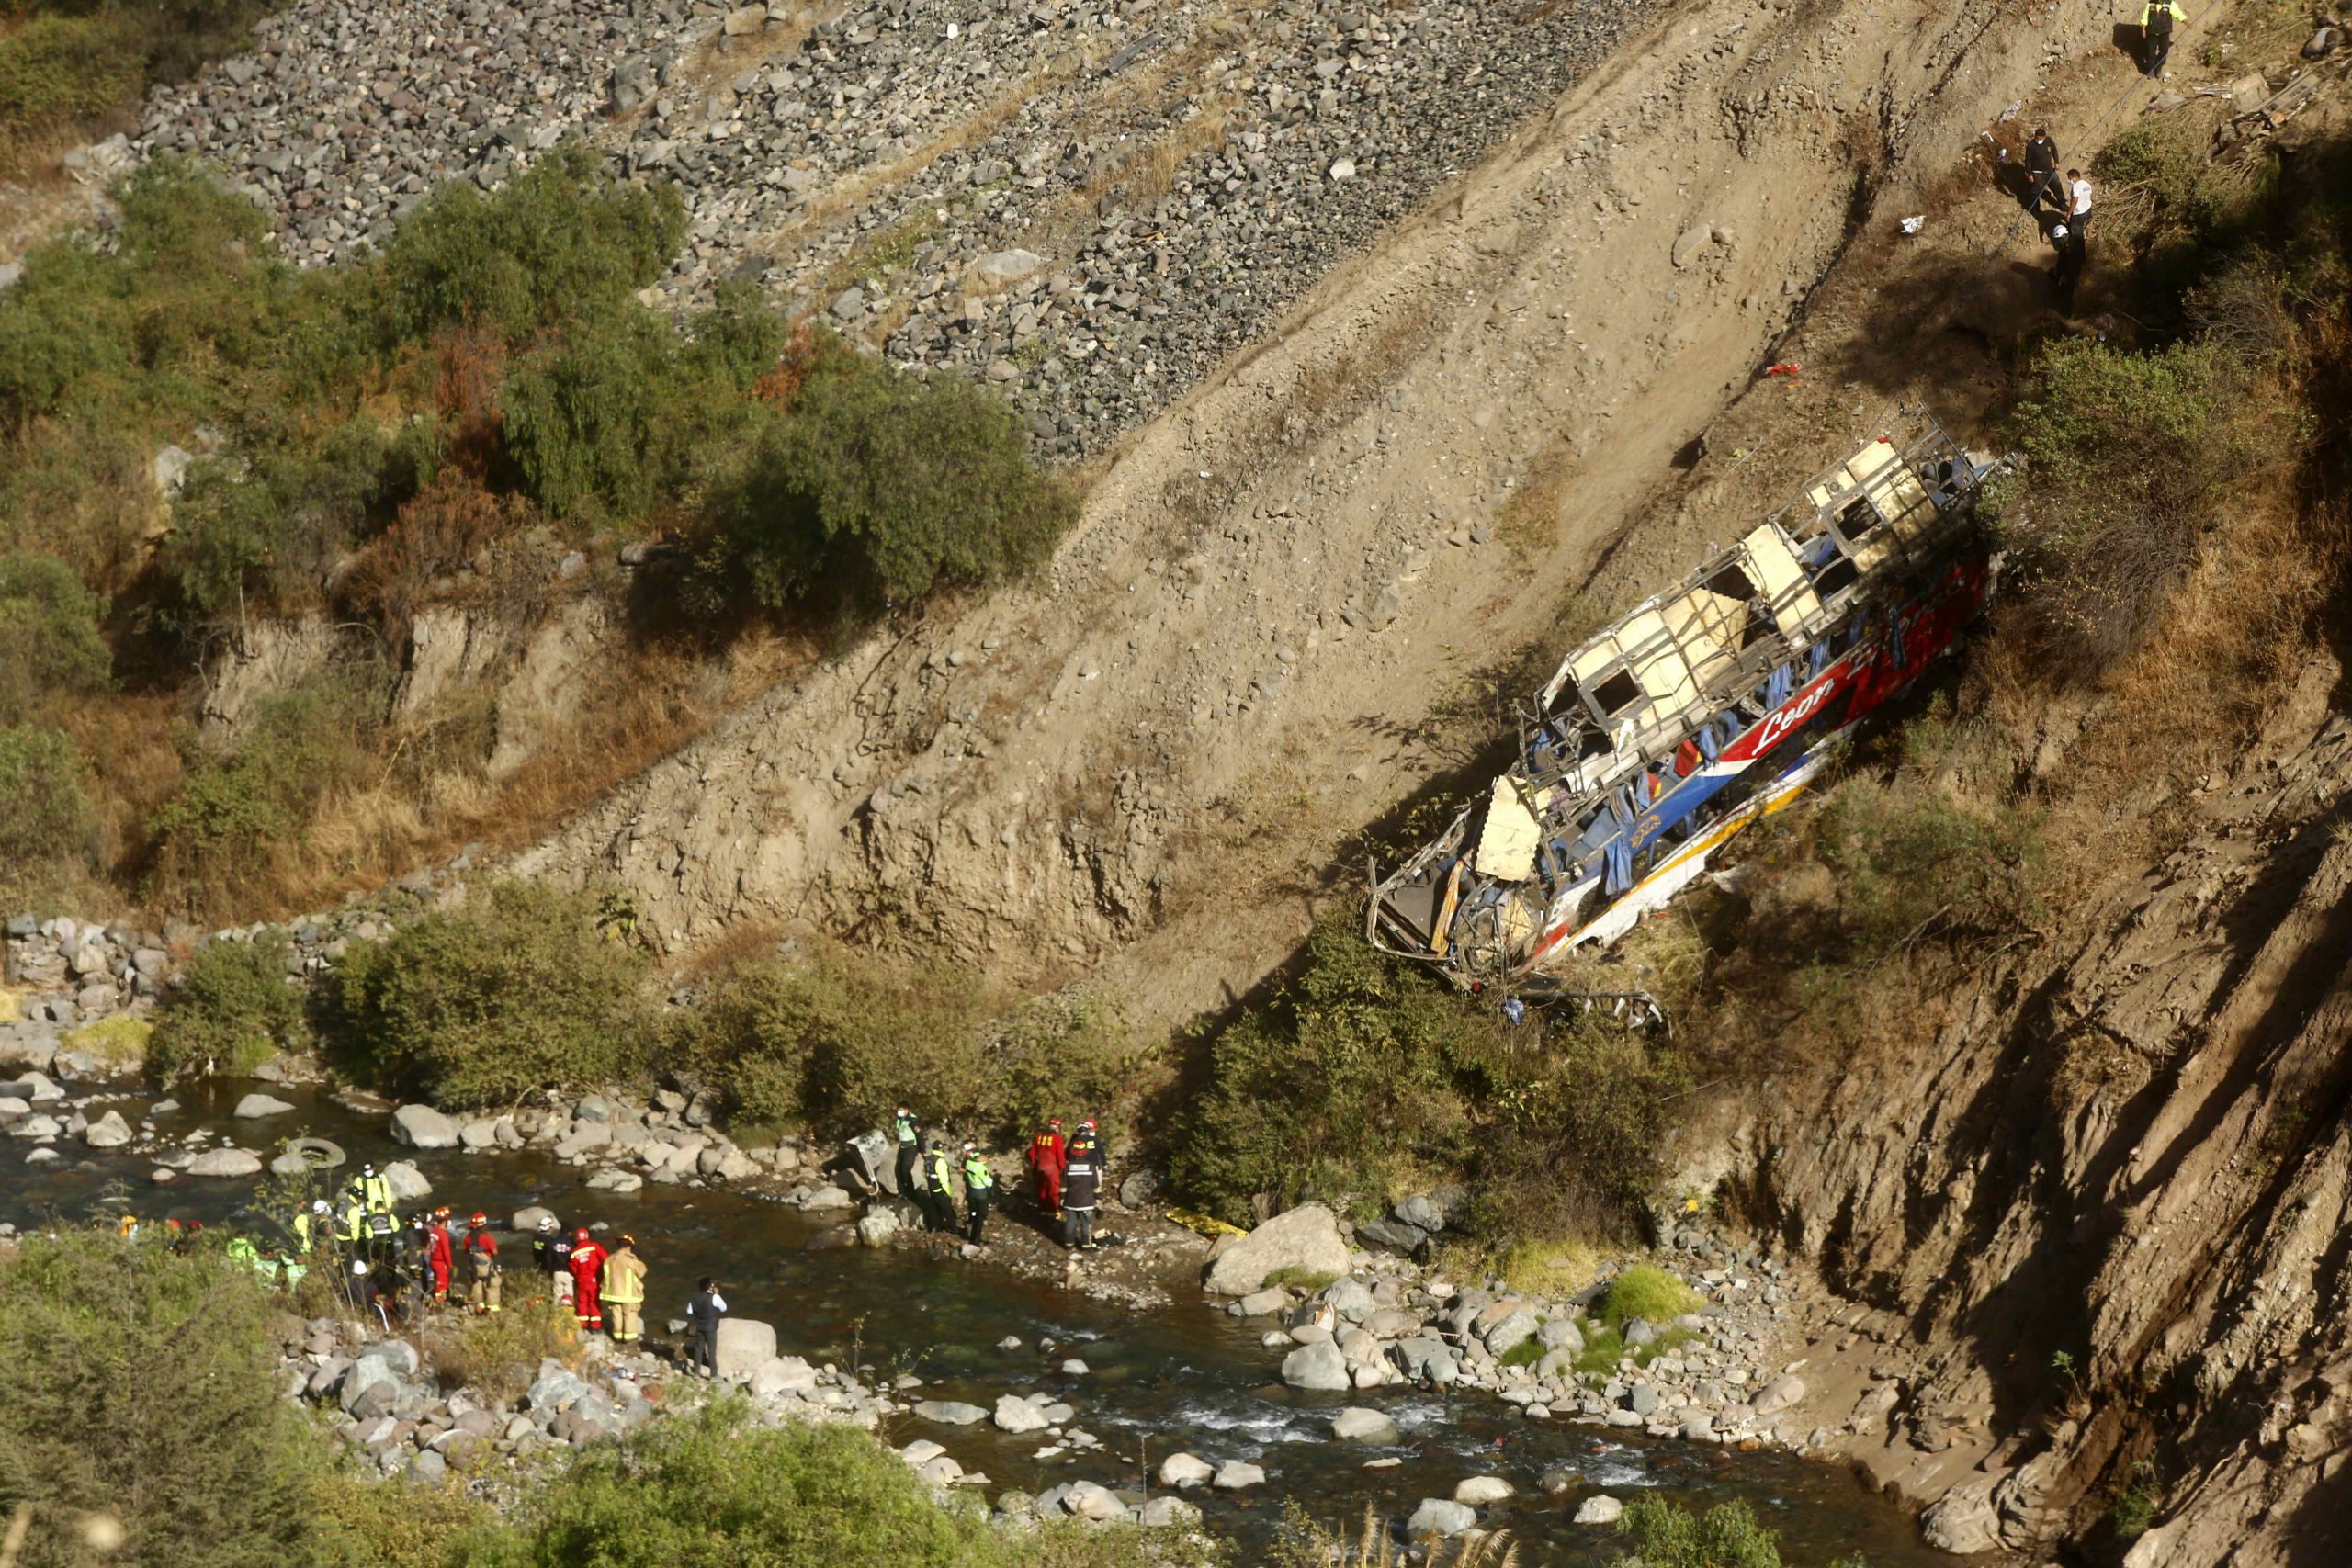 epa09439120 View of the crashed bus, en route to Lima, Peru, 31 August 2021. The passenger bus accident has left at least 29 dead and around 20 injured after the unit crashed and fell into a ravine on the central highway on its way to Lima.  EPA/Felix Ingaruca